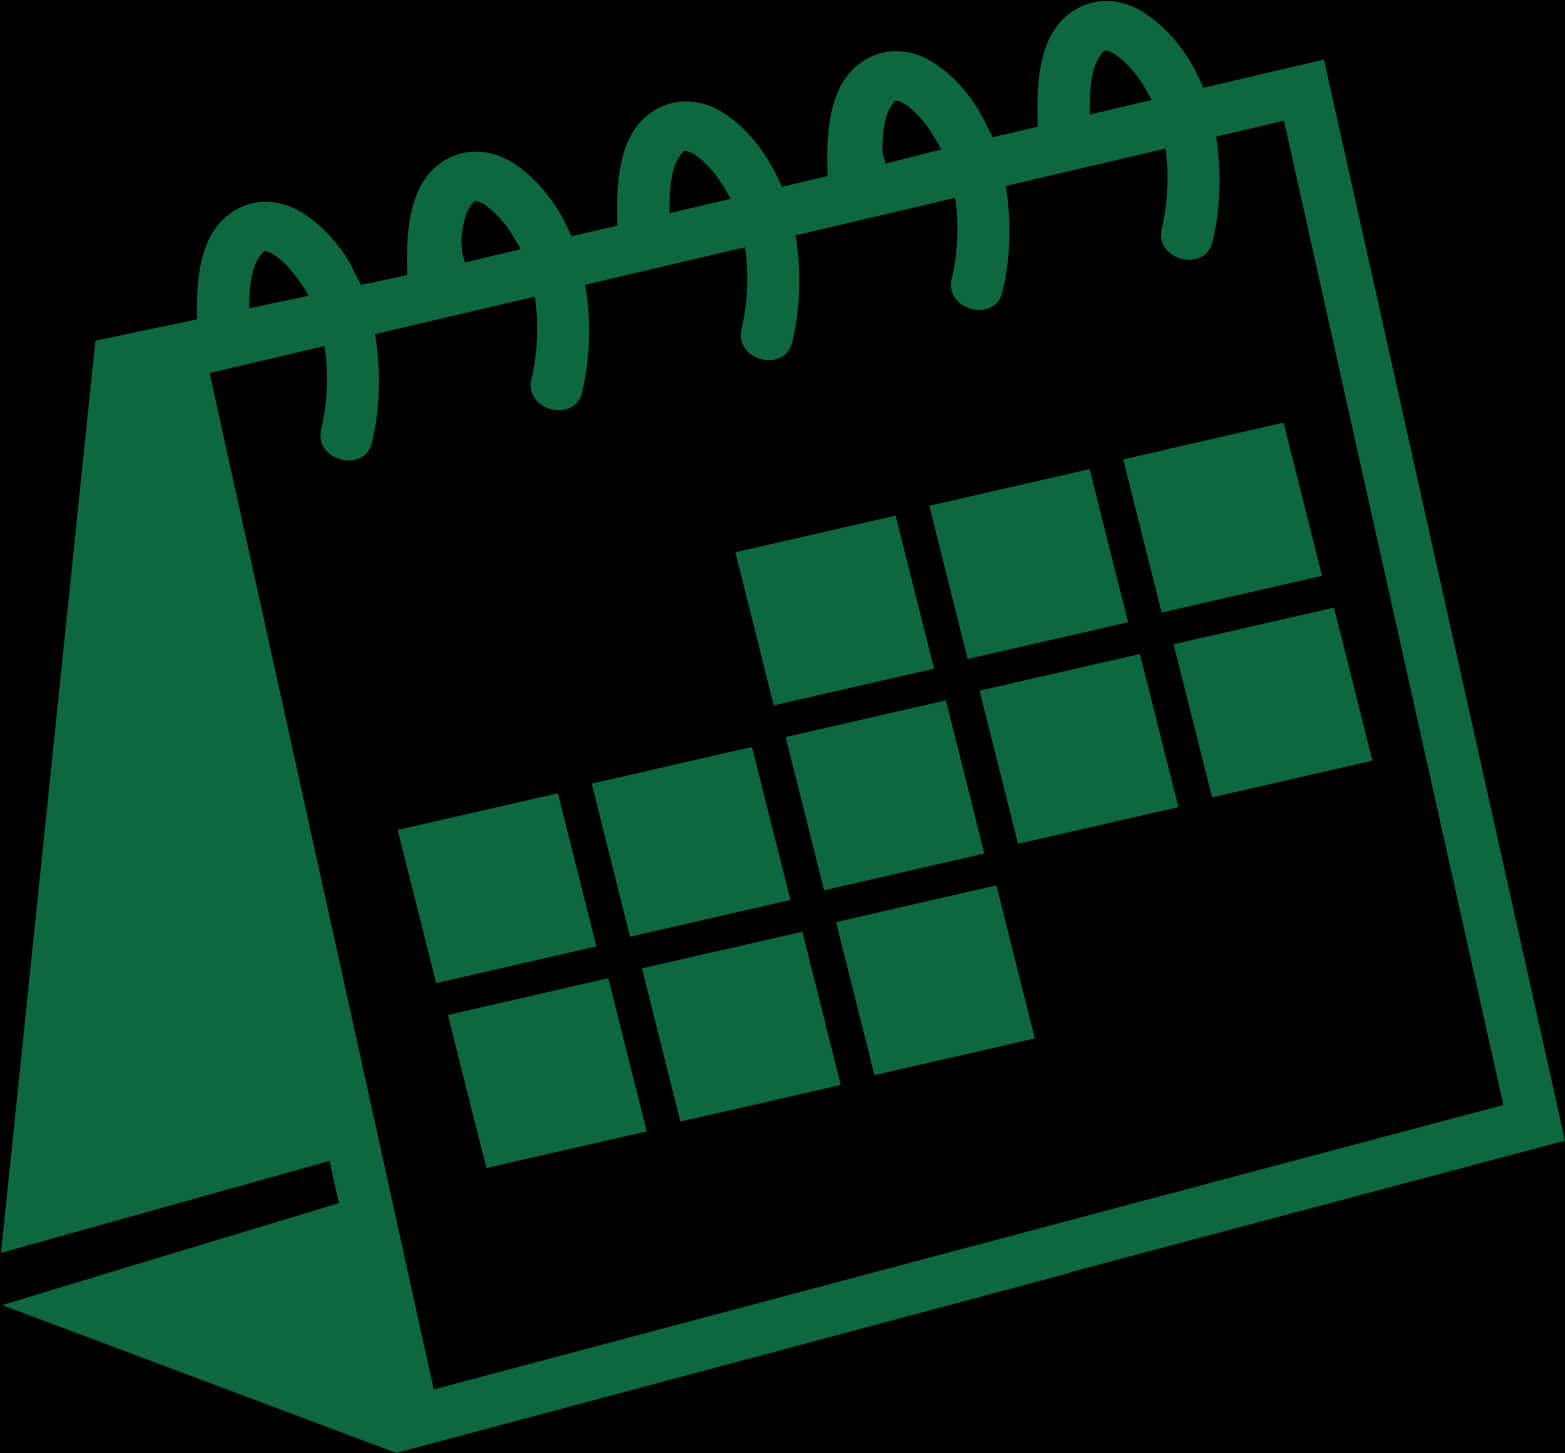 A Green Calendar With Black Background